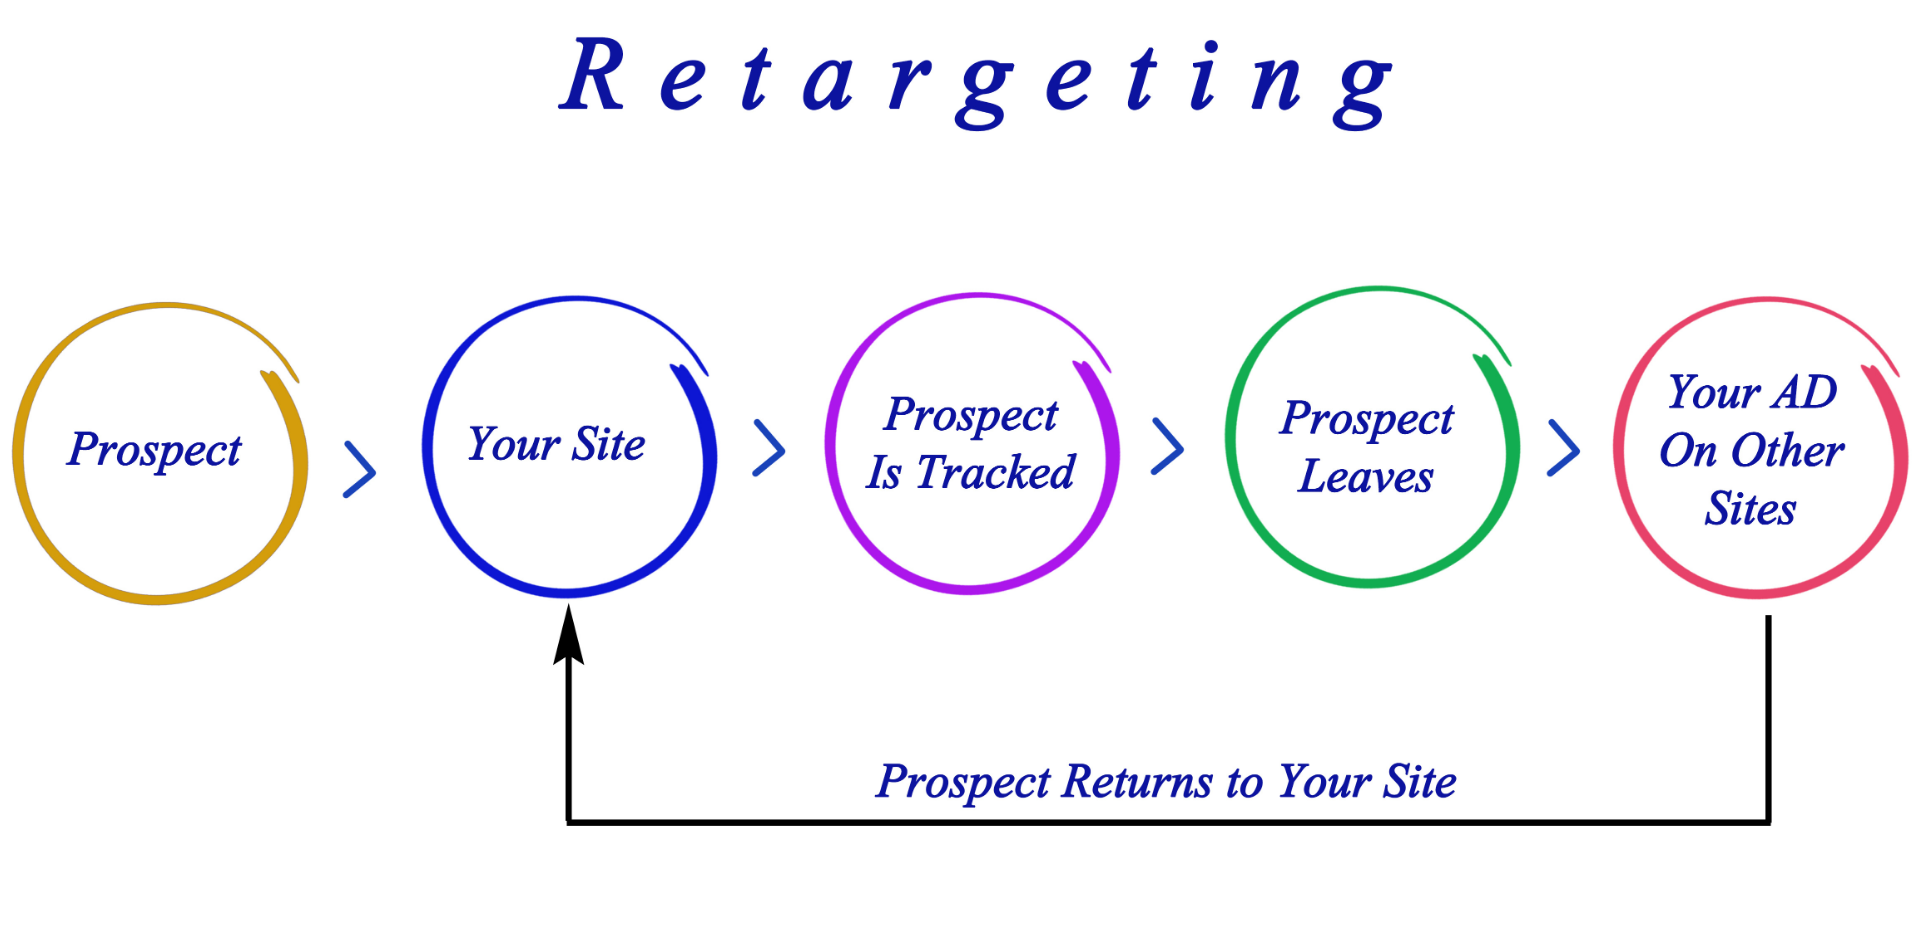 How to Use Retargeting Campaigns Without Becoming Obtrusive